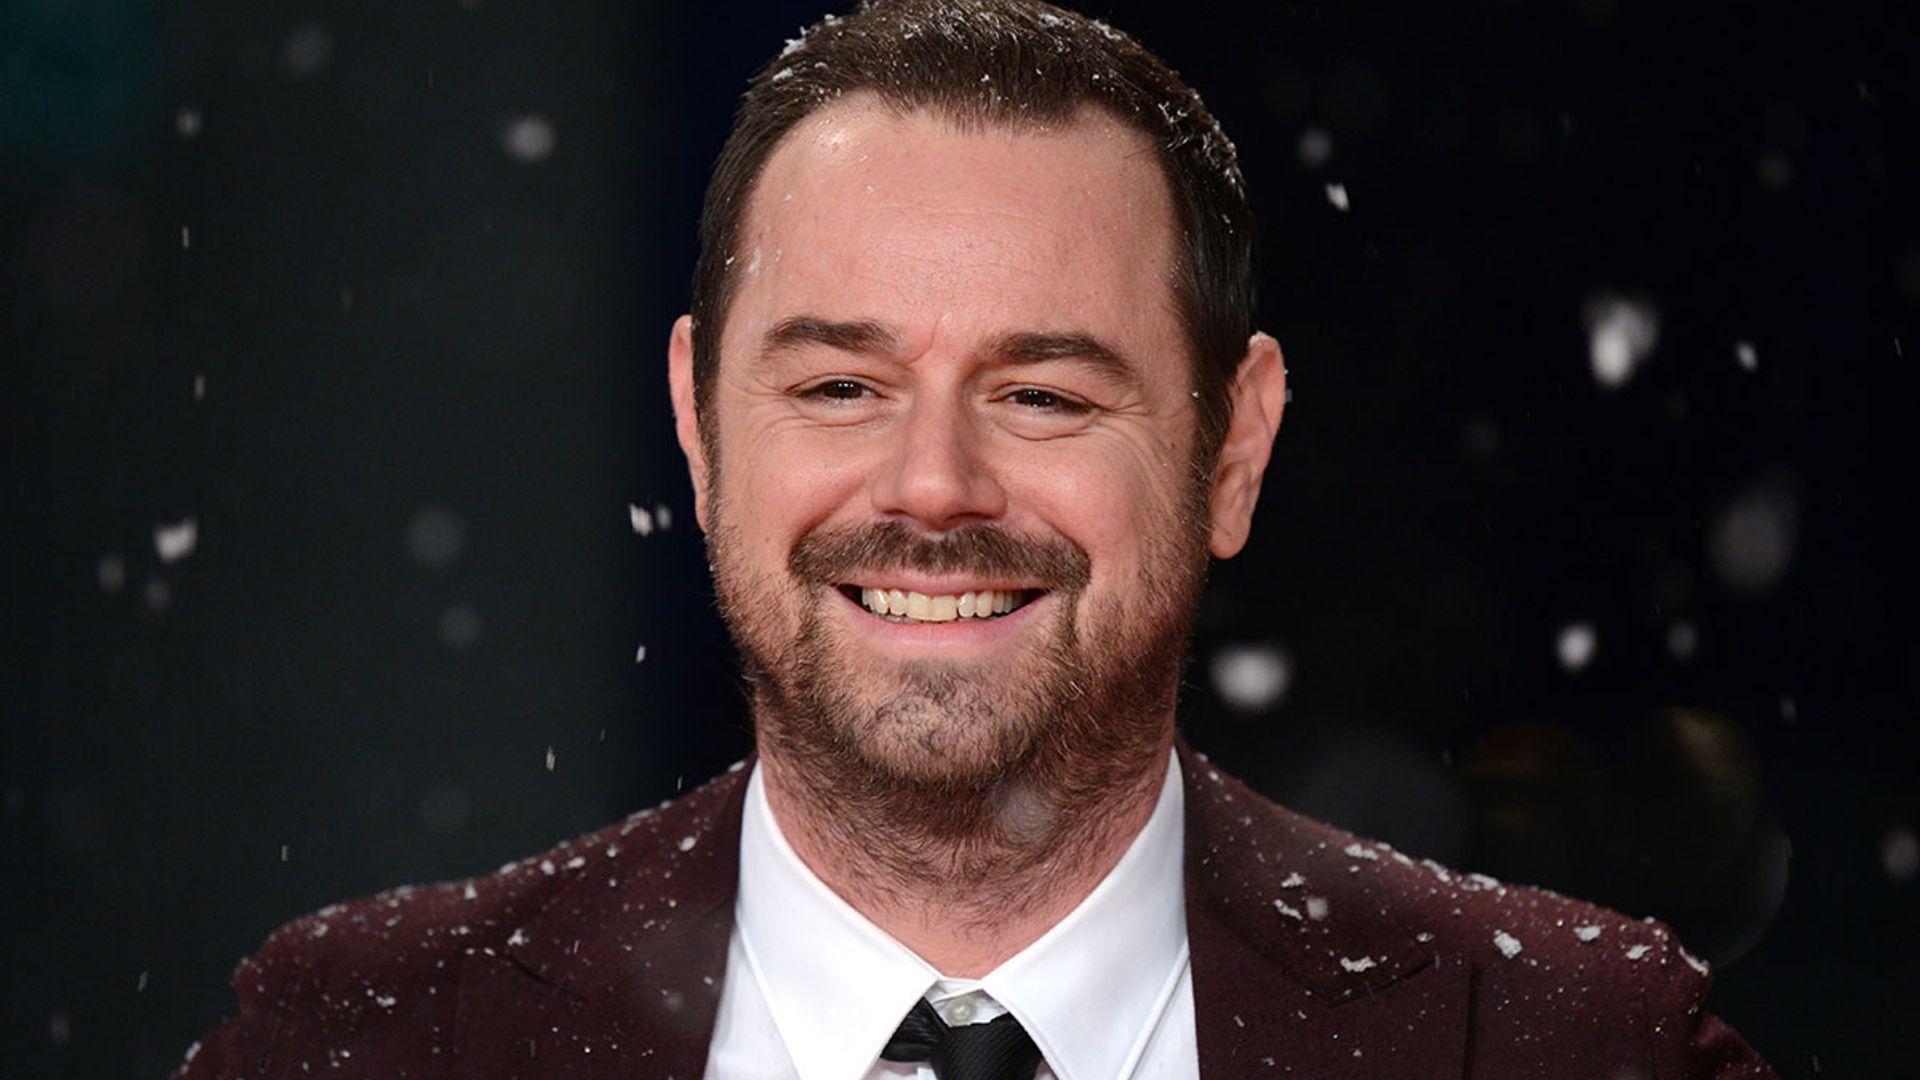 Danny Dyer set to host new Saturday night gameshow - details